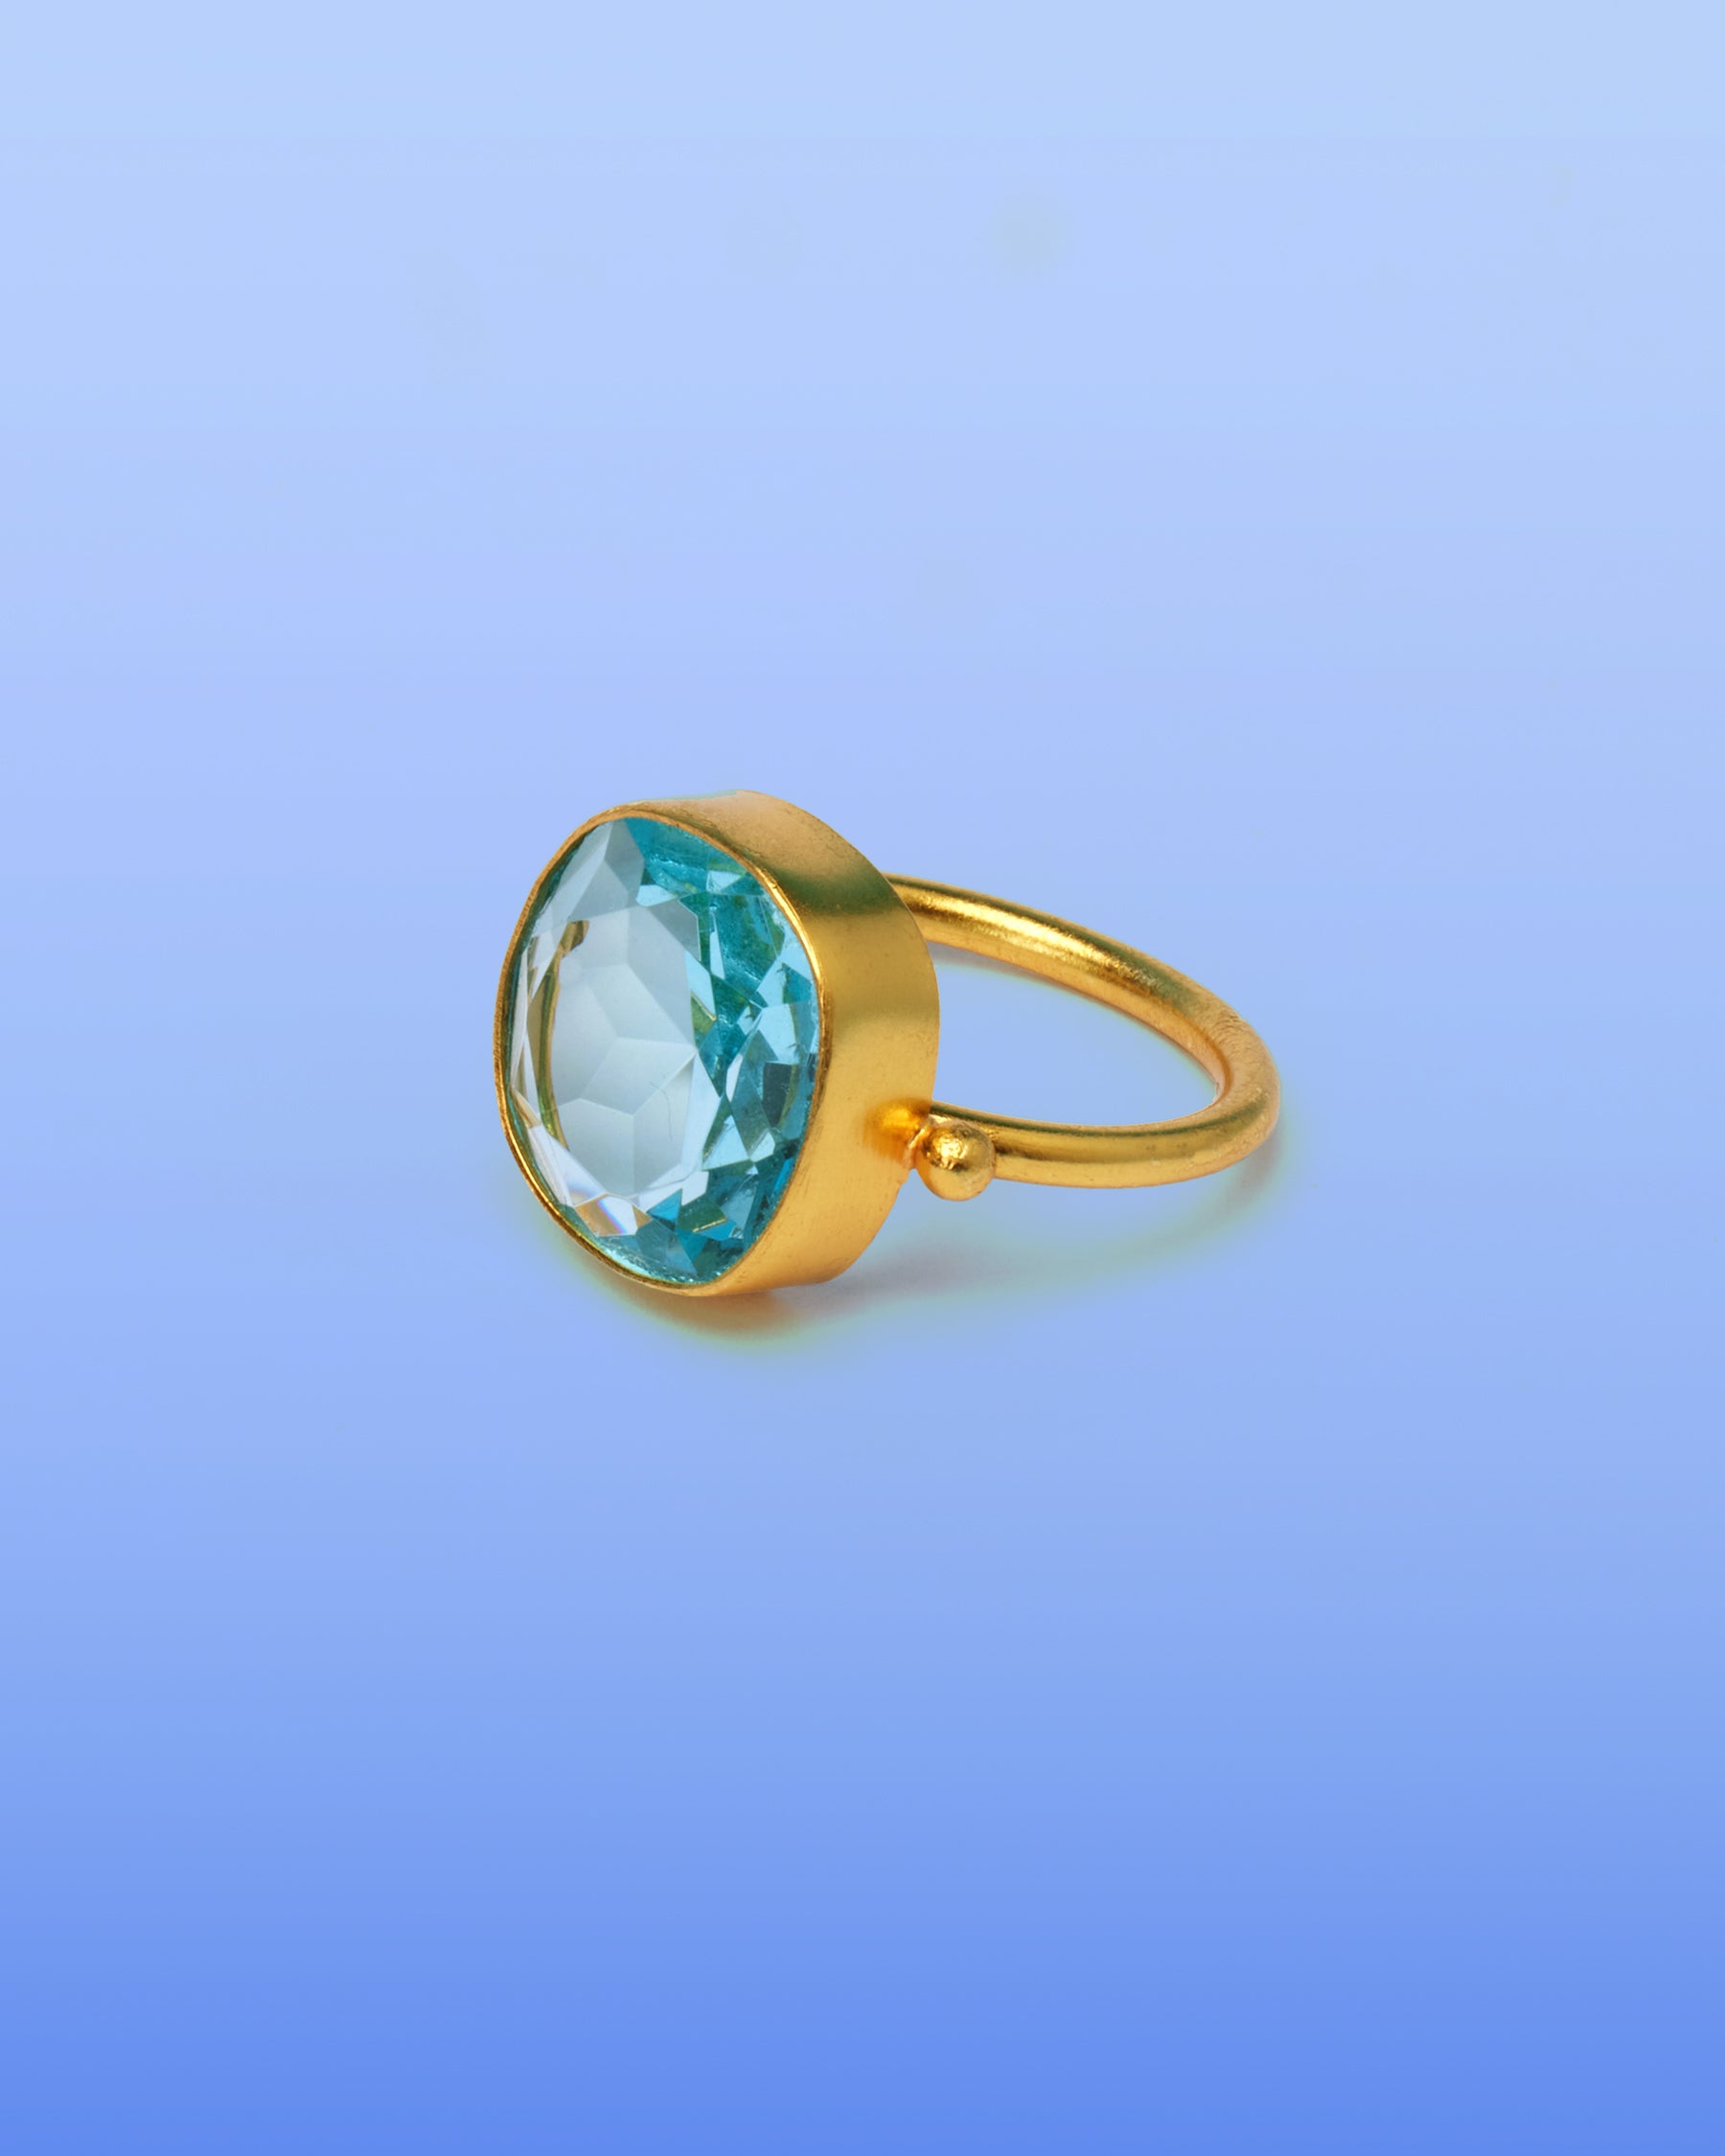 Darby Ring in Crystal Turquoise